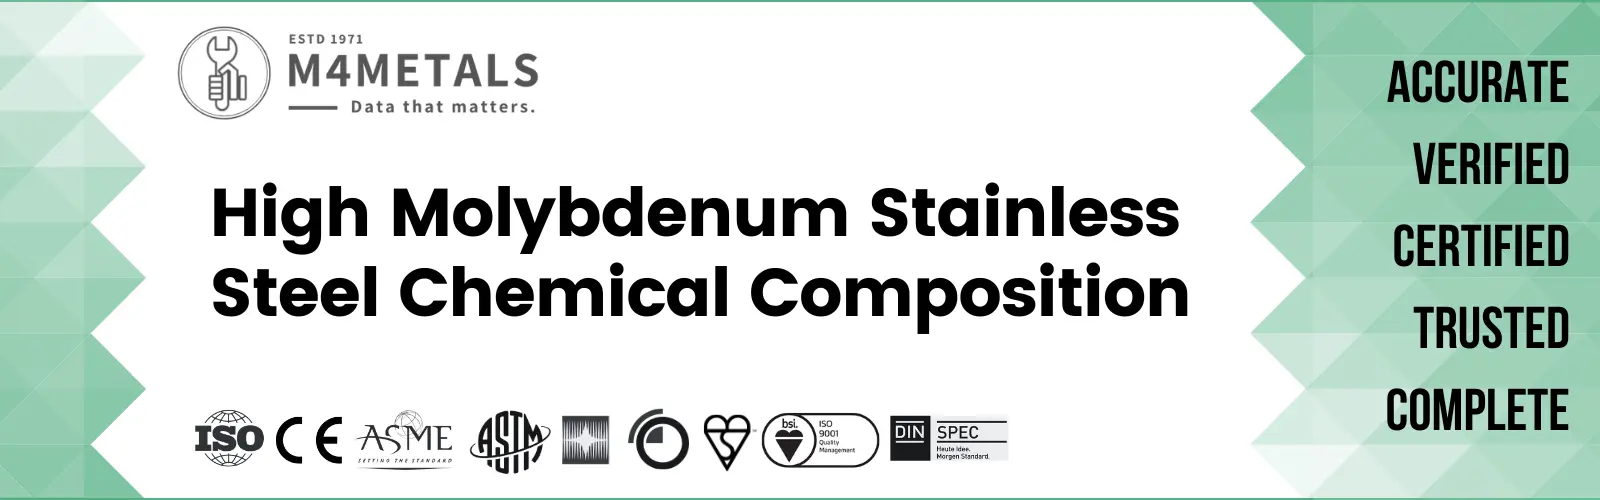 High Molybdenum Stainless Steel Chemical Composition